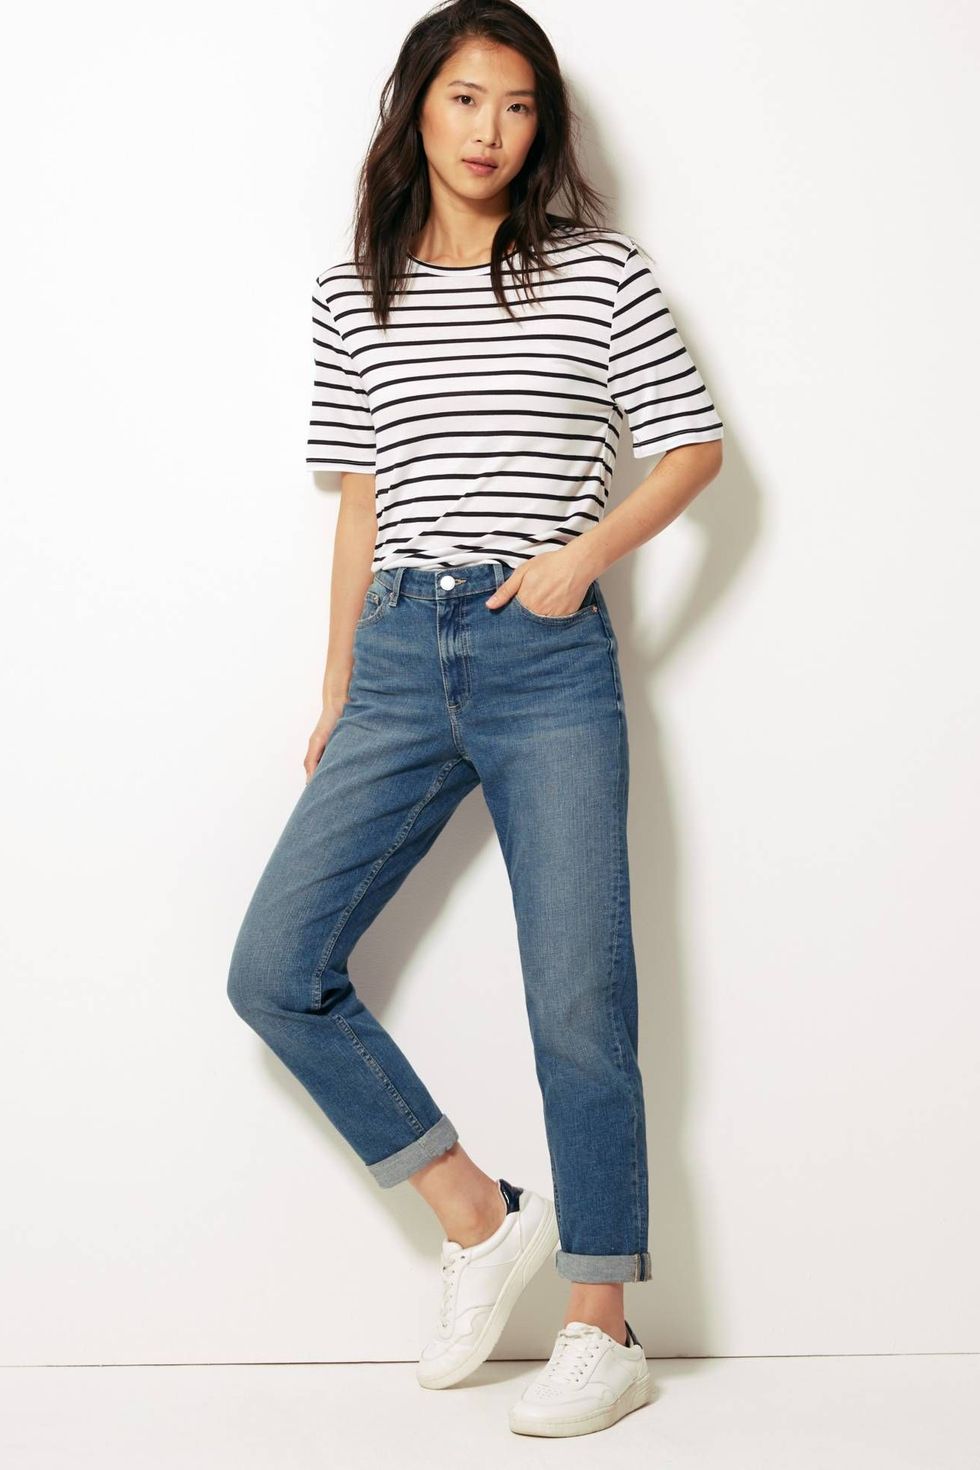 How to wear a Breton top with skirt or trousers